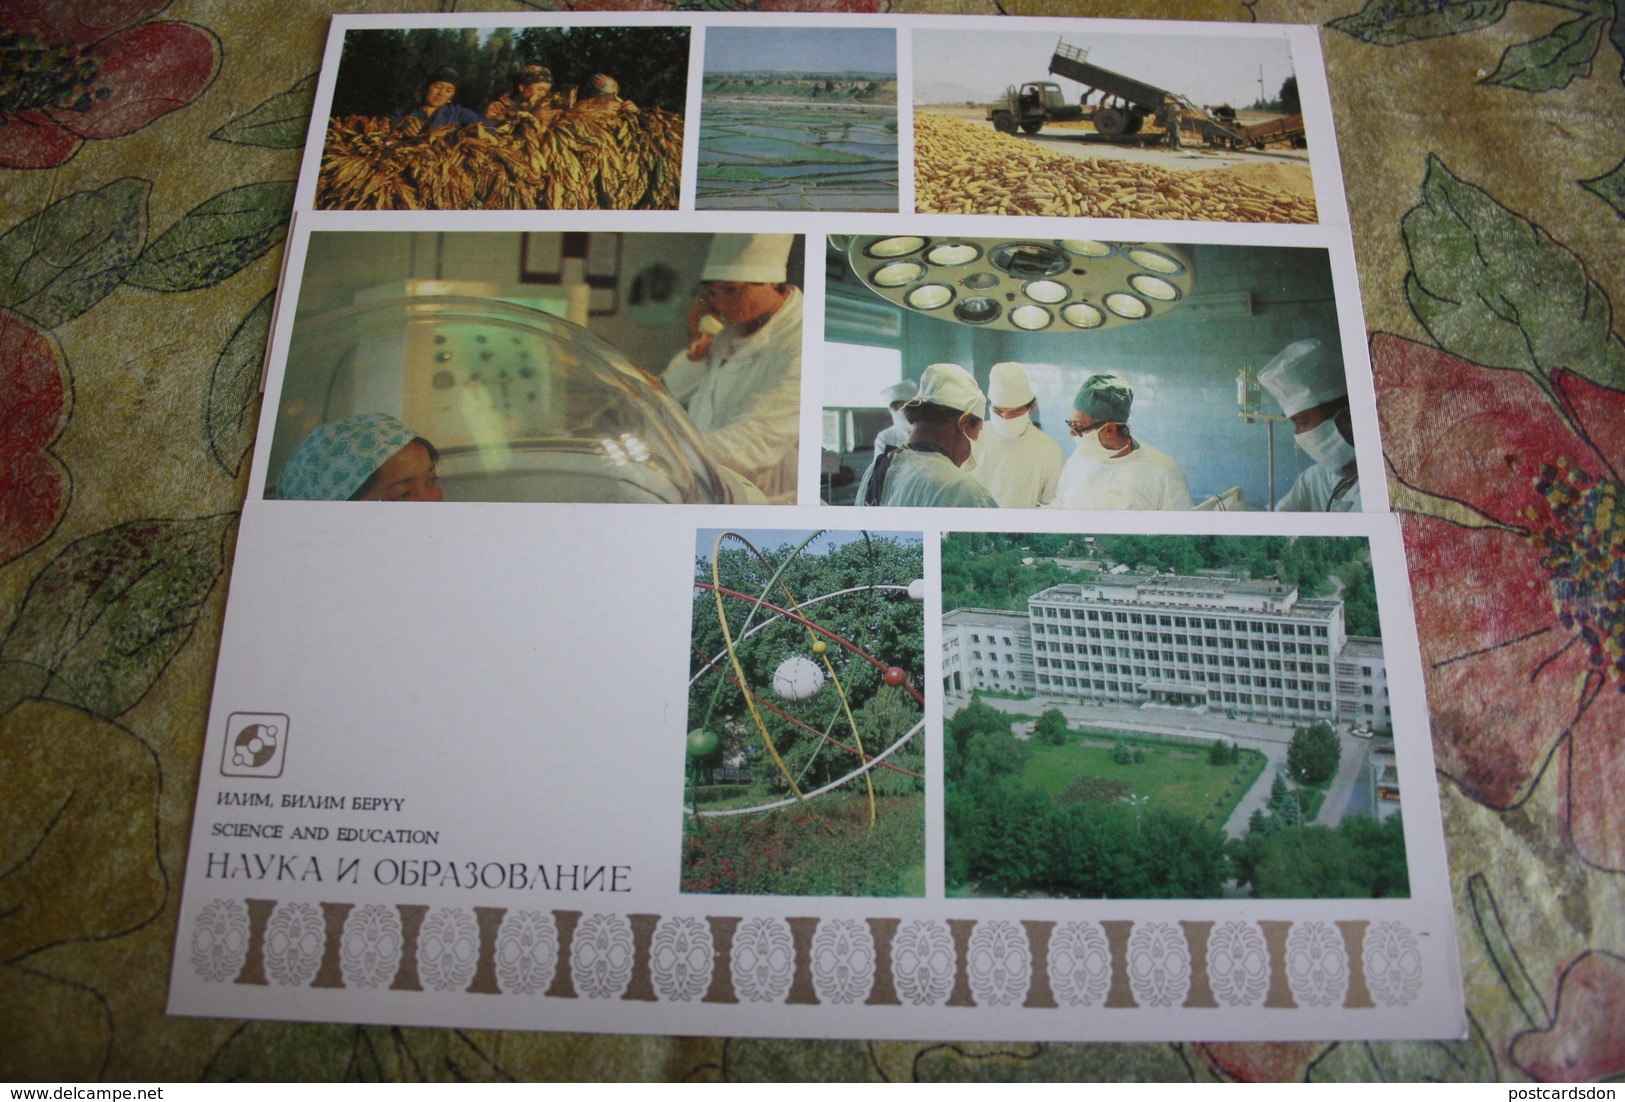 Kyrgyzstan.  About the country - rare old USSR postcard set - 25 PCs lot 1984